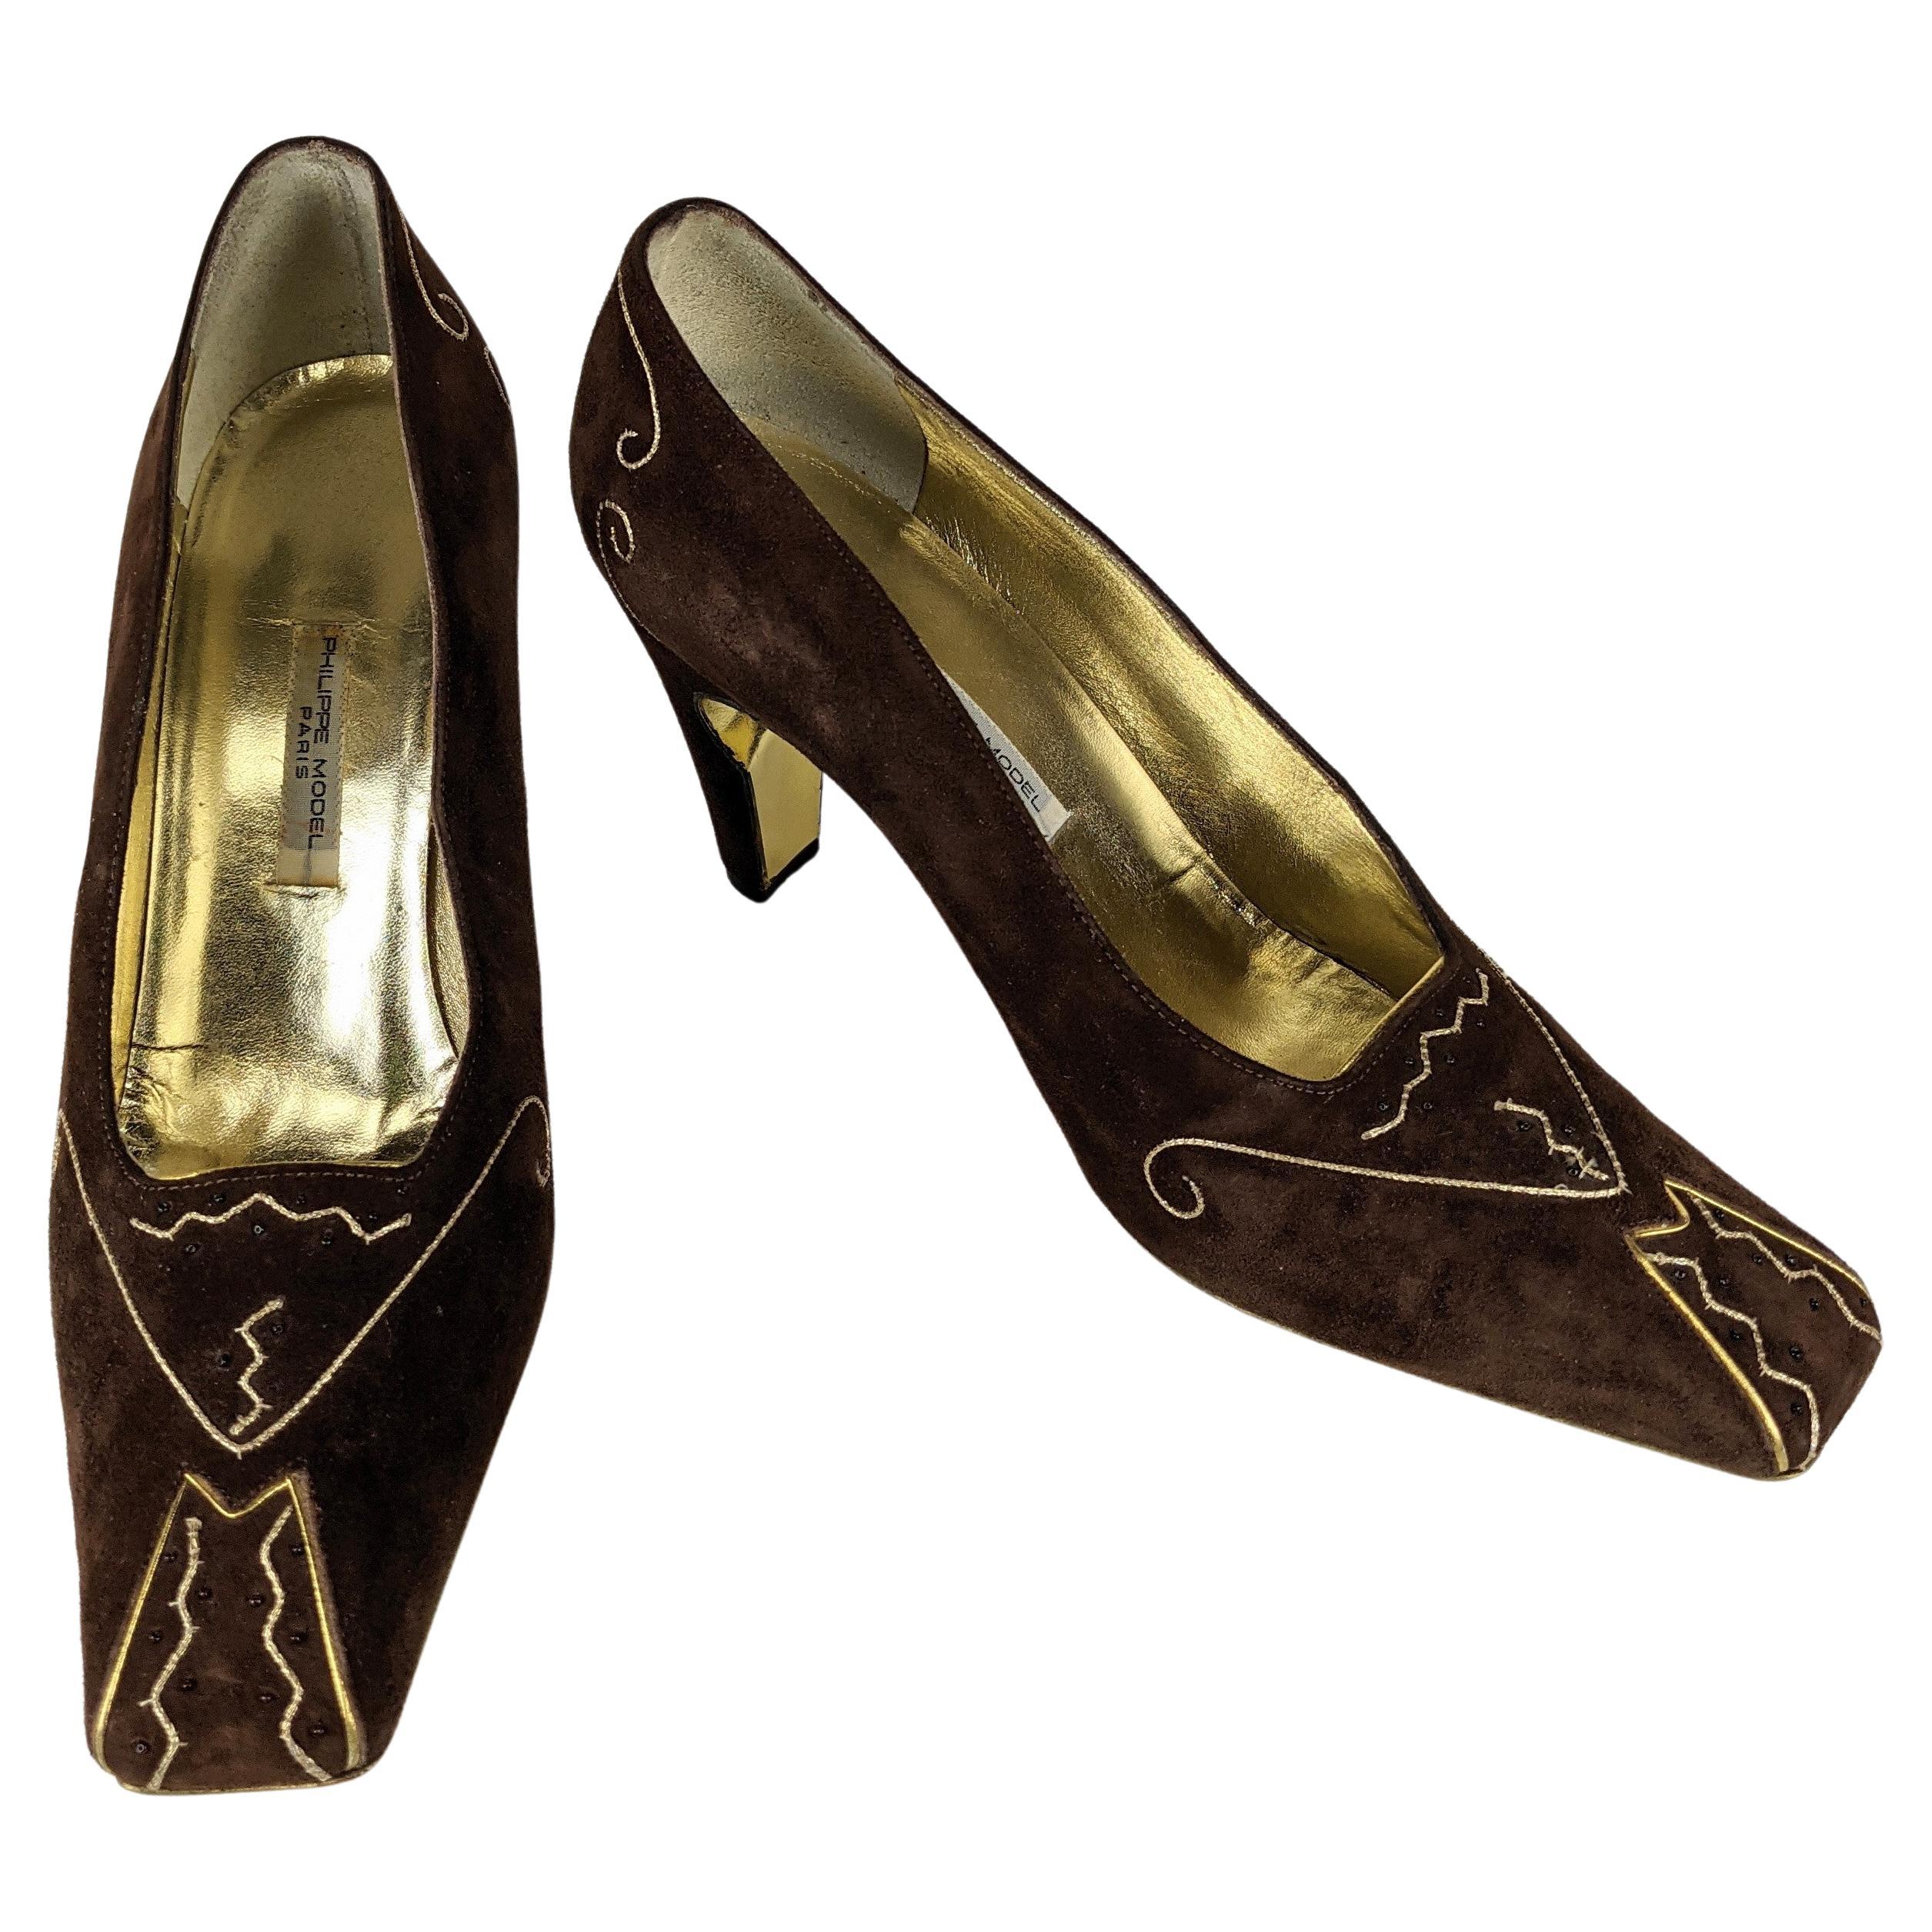 Phillipe Model Suede and Gold Kid Pumps. Unusual square tip pumps in dark chestnut suede with gold soutache abstract embroidery with tiny brown seed beads. 
Lined in gold kid interior and sole. Unusual cut out heel treatment. 
Designed in Paris.